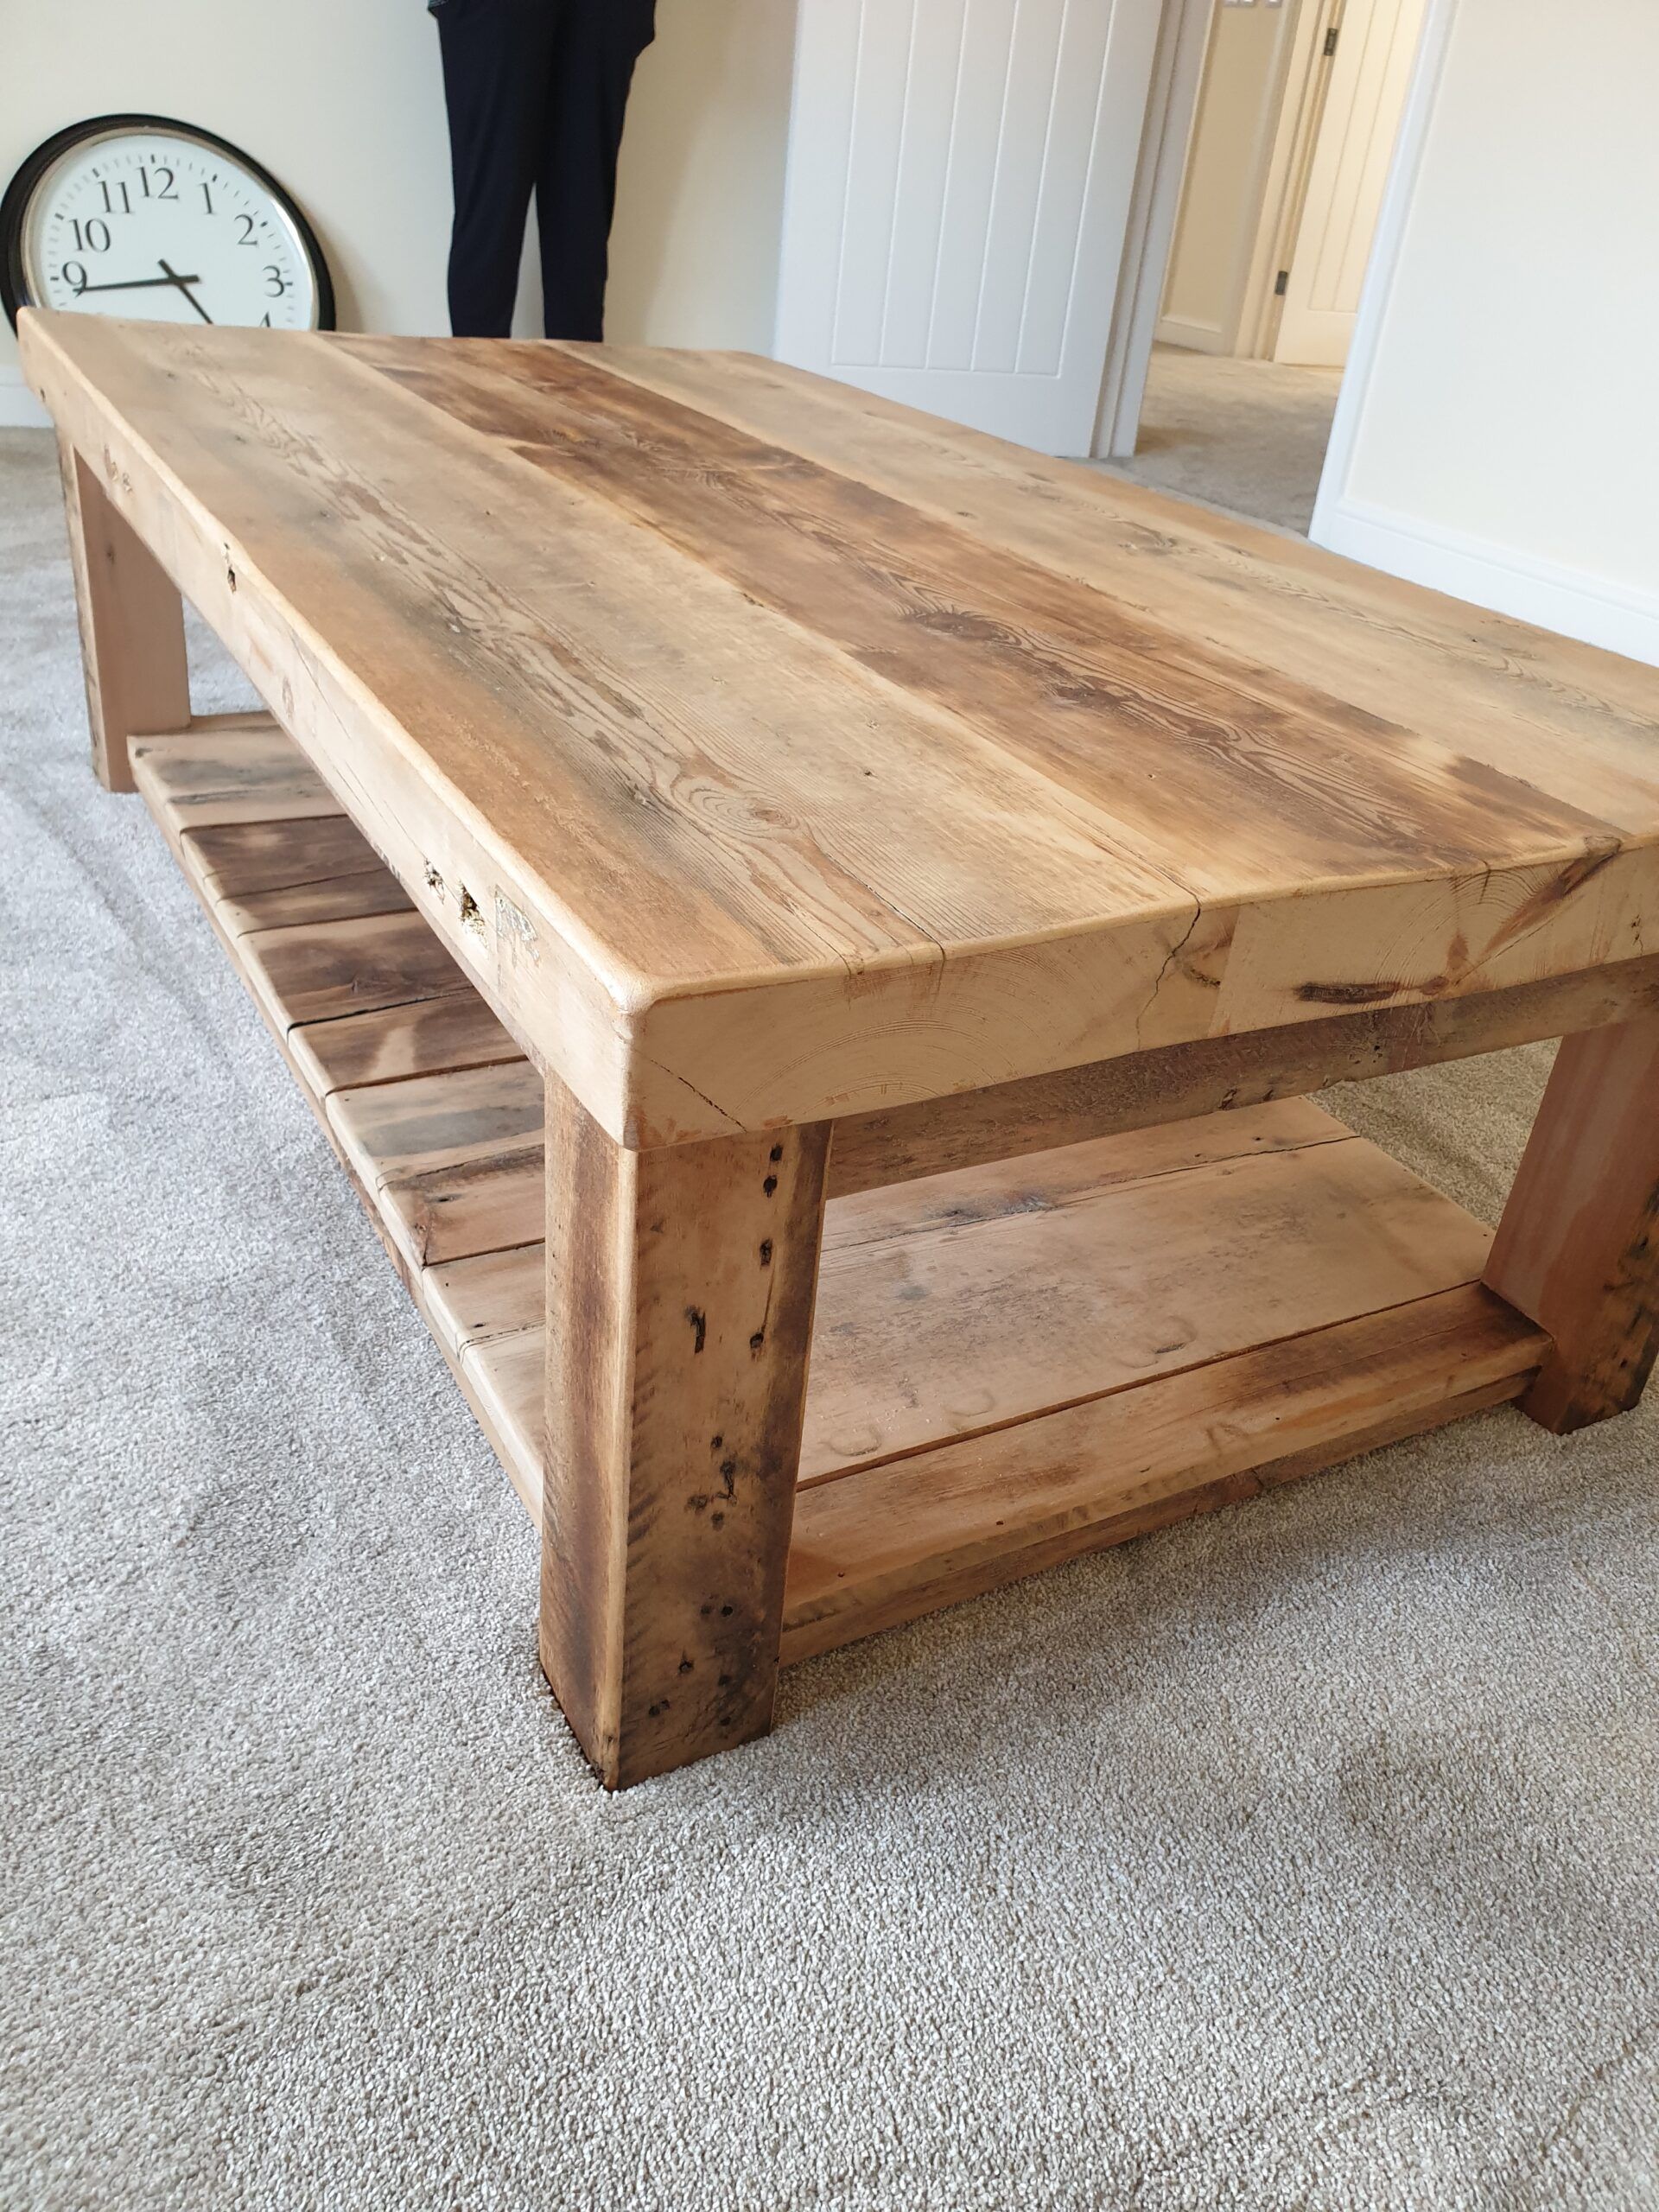 Buy Rustic Wood Coffee Table Made From Reclaimed Timber For Rustic Coffee Tables (View 6 of 15)